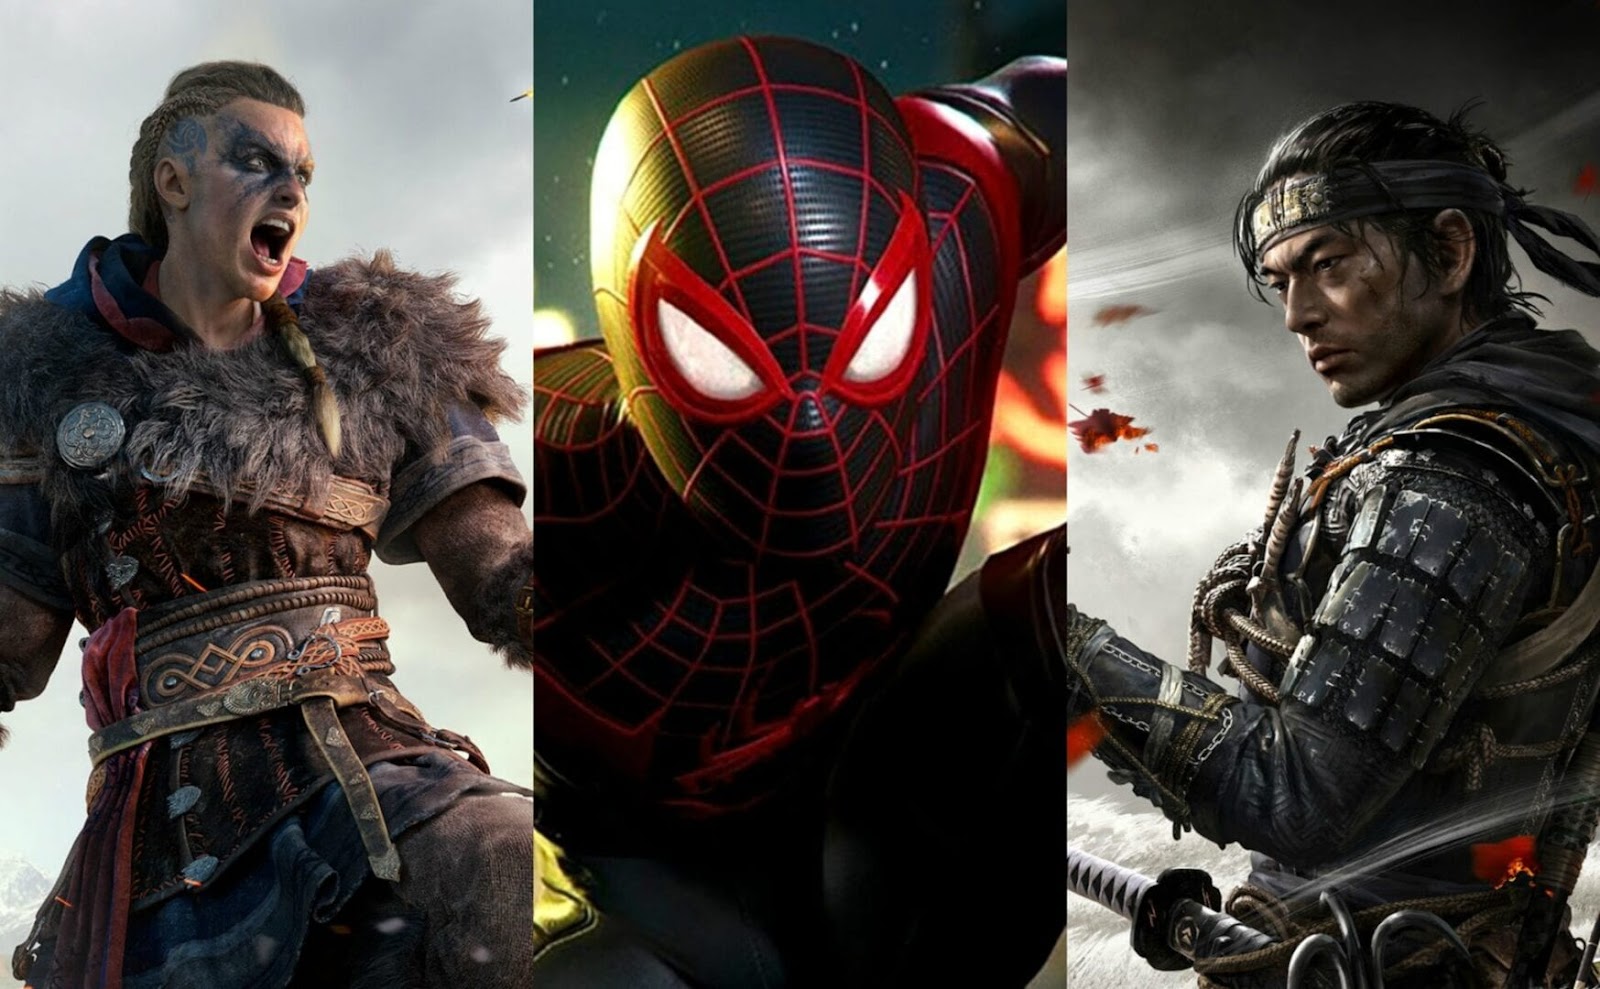 The Best Action Games